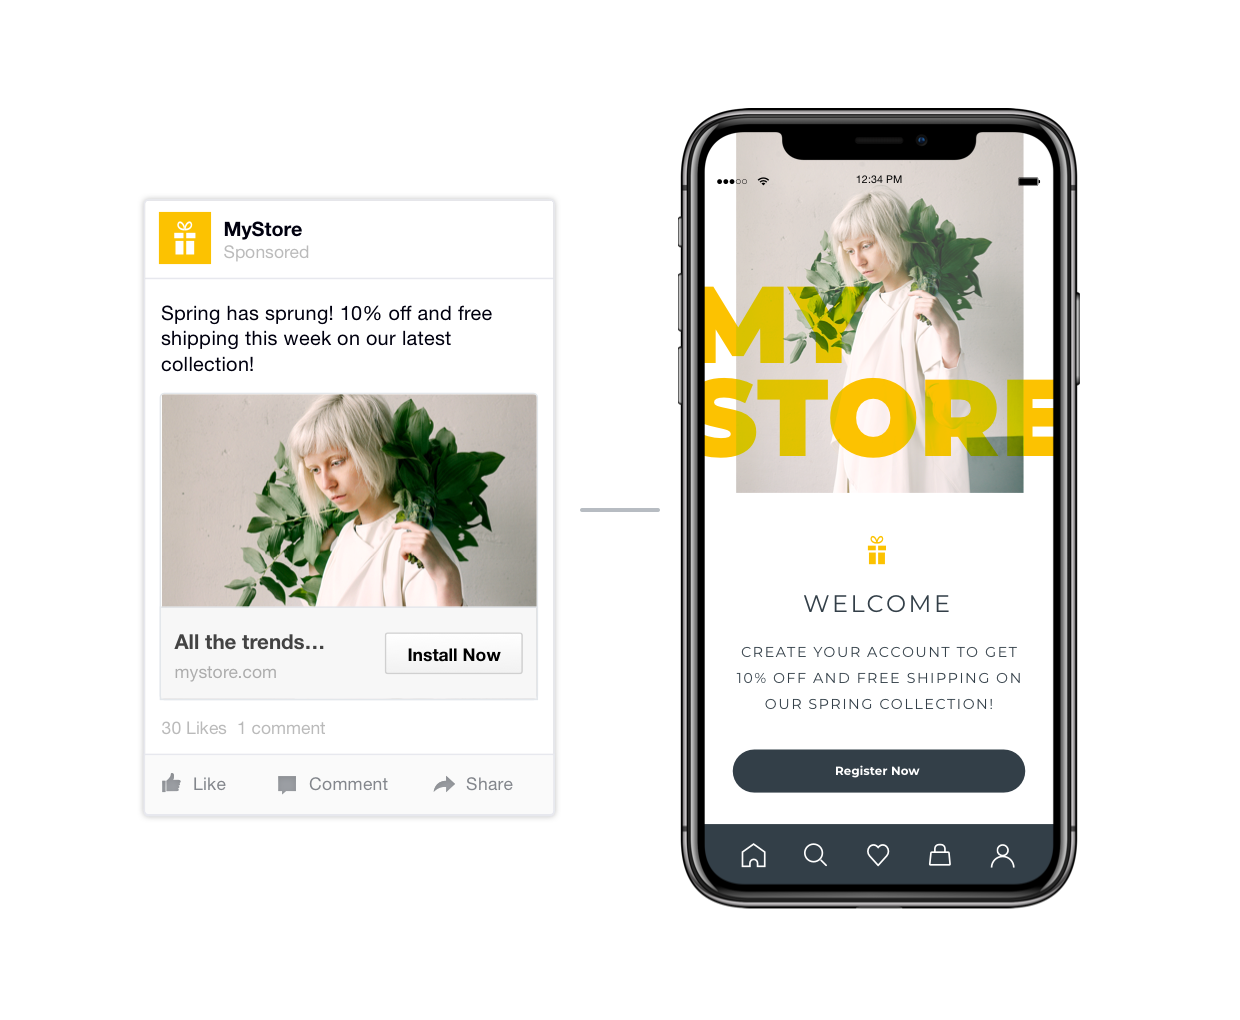 Optimize Onboarding with Facebook Ad-to-App 